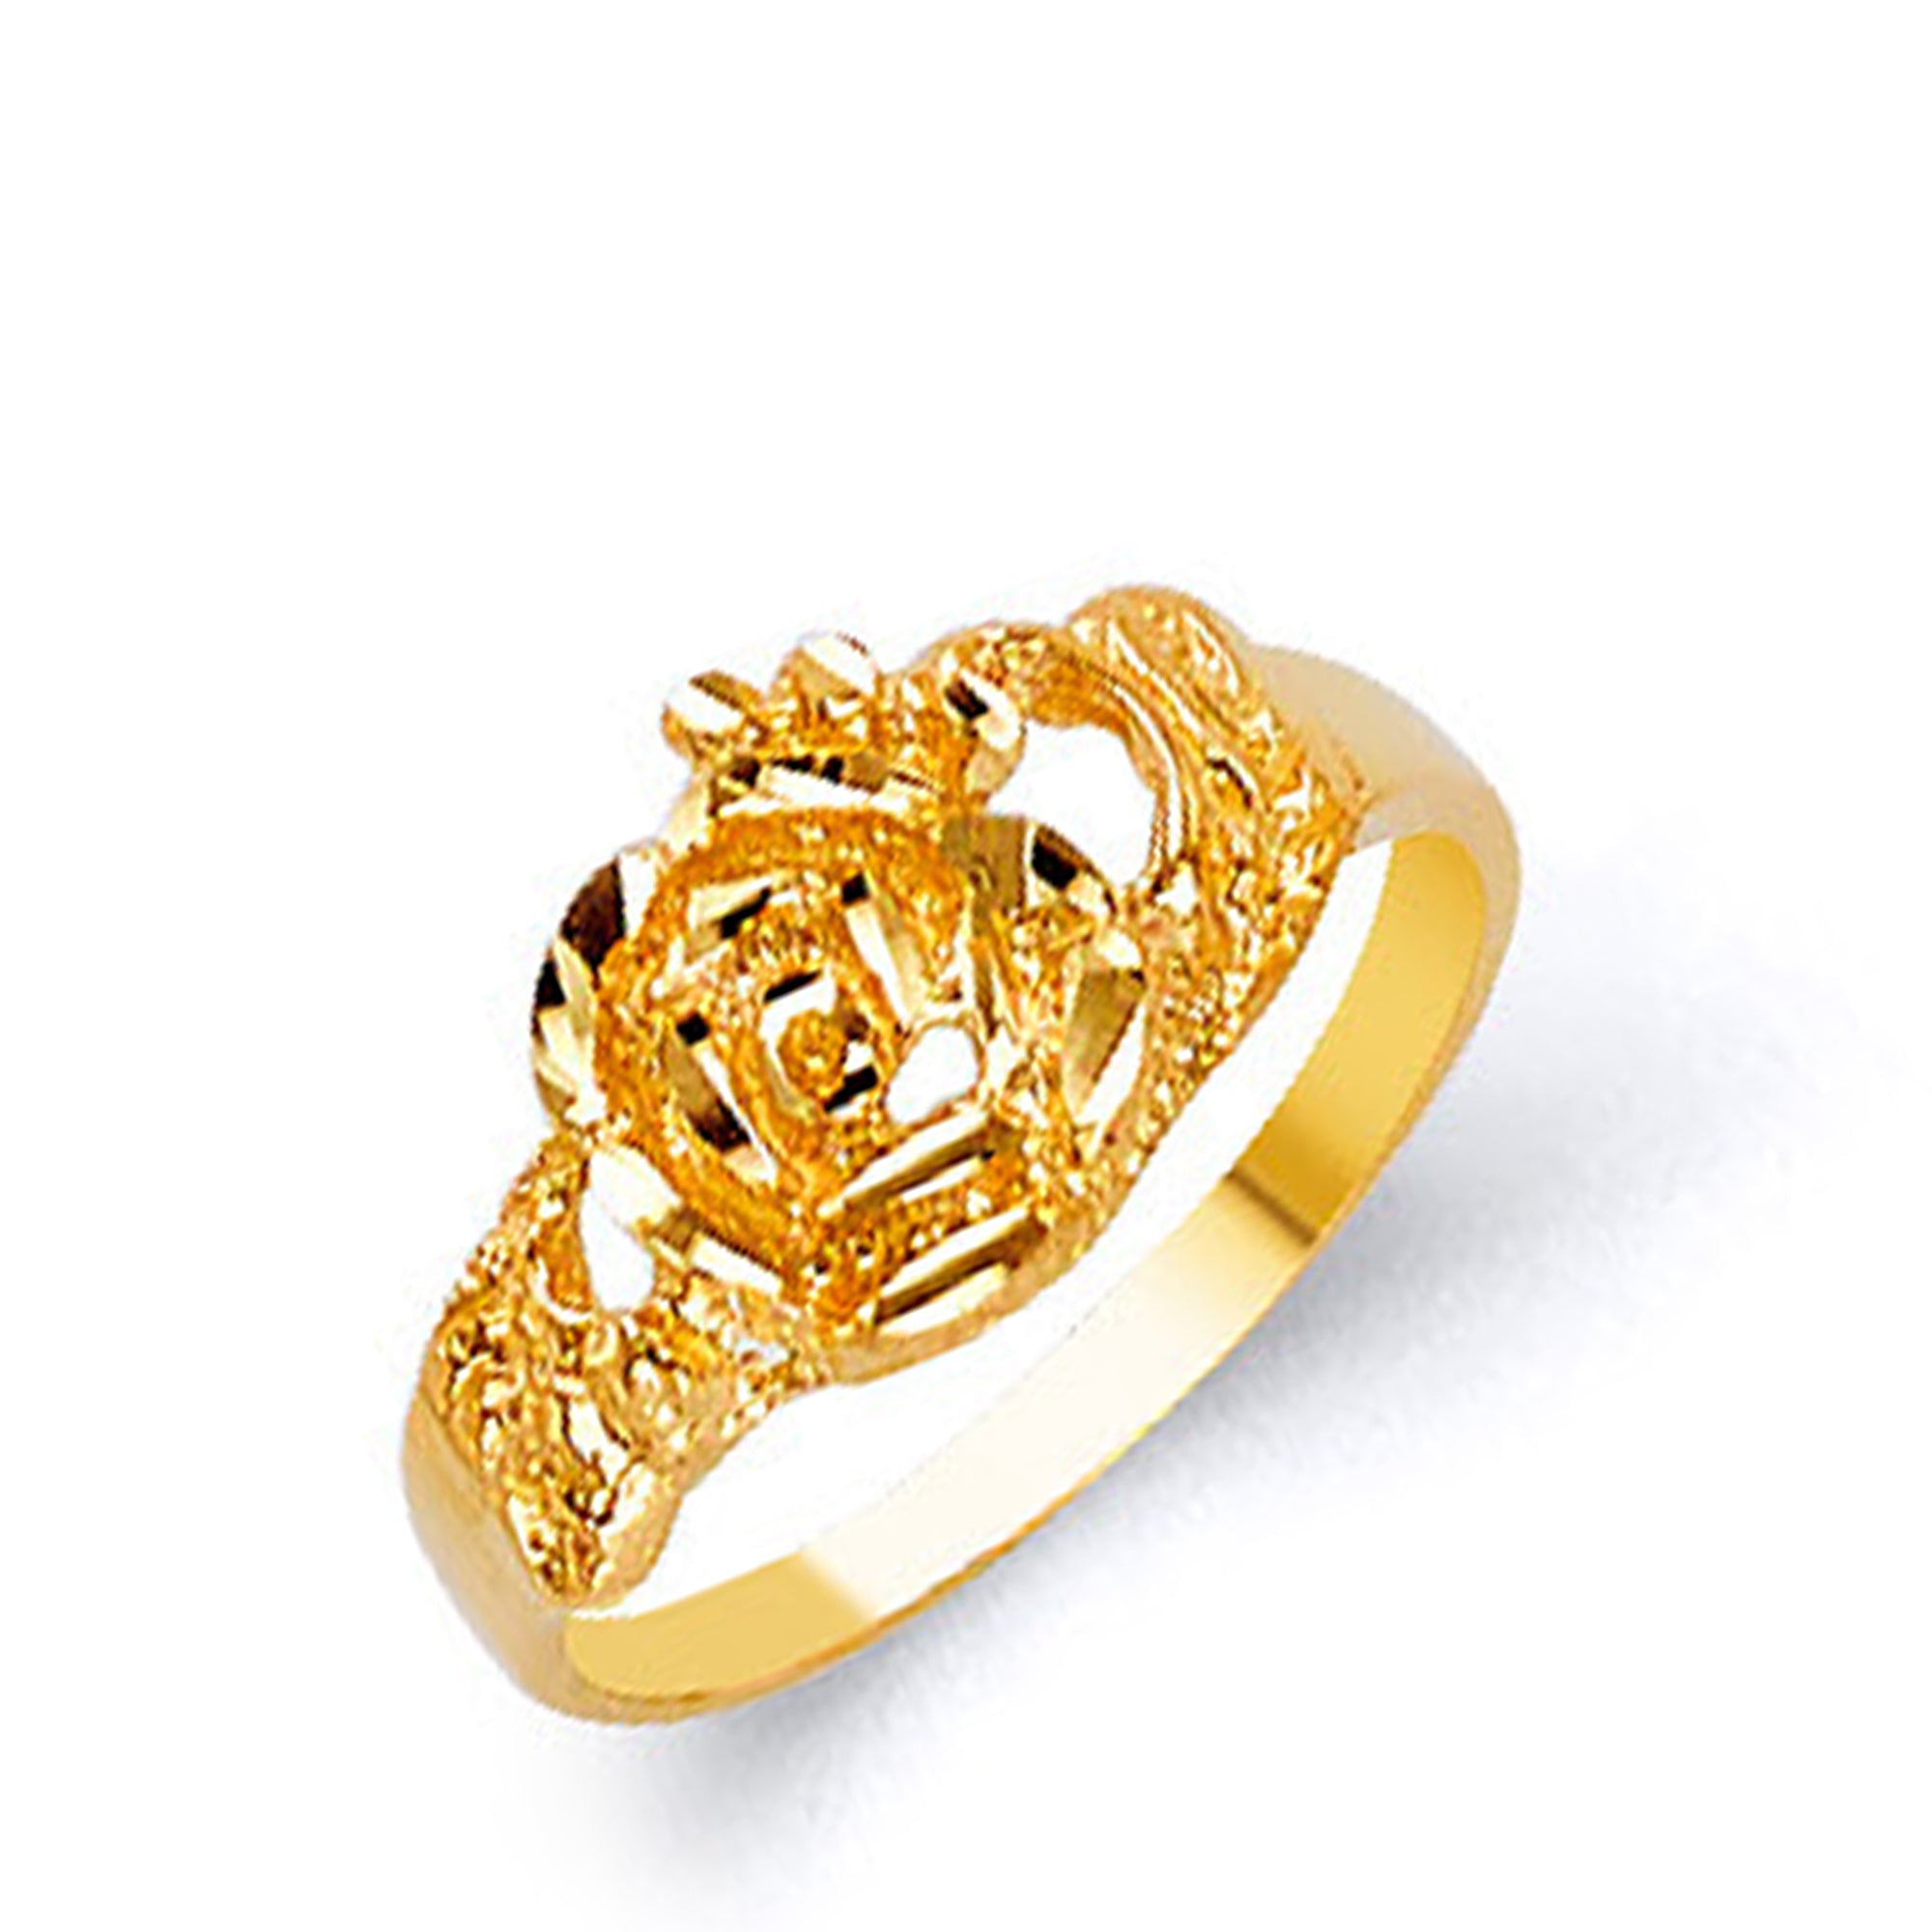 Diva styled Decor Ring in Solid Gold 